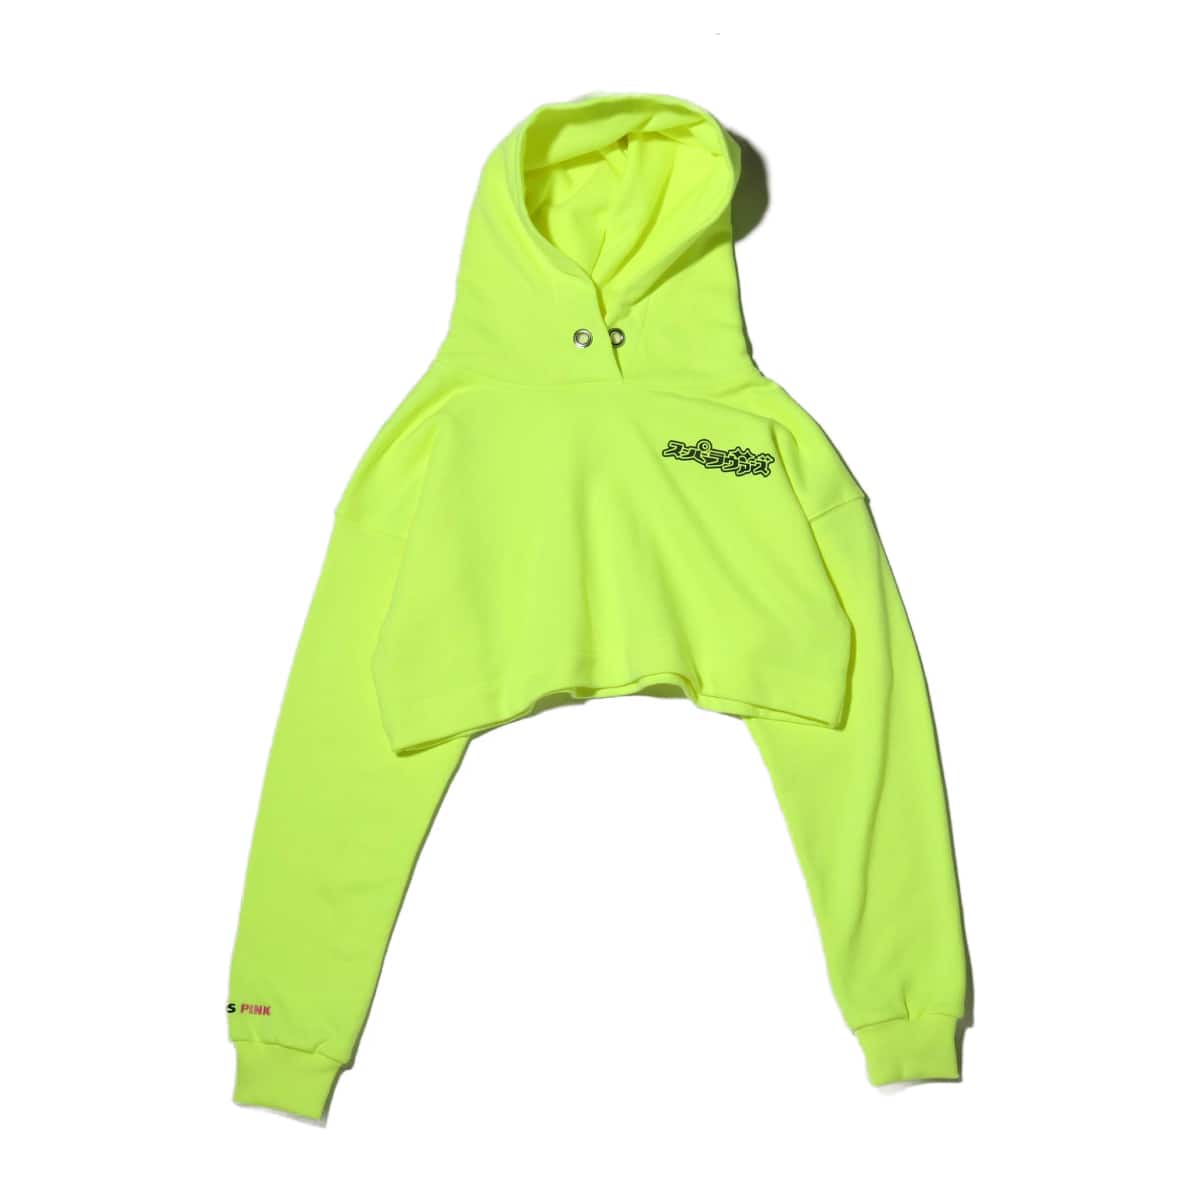 SUPER LOVERS × atmos pink Short Length Hoodie YELLOW 20SP-I_photo_large